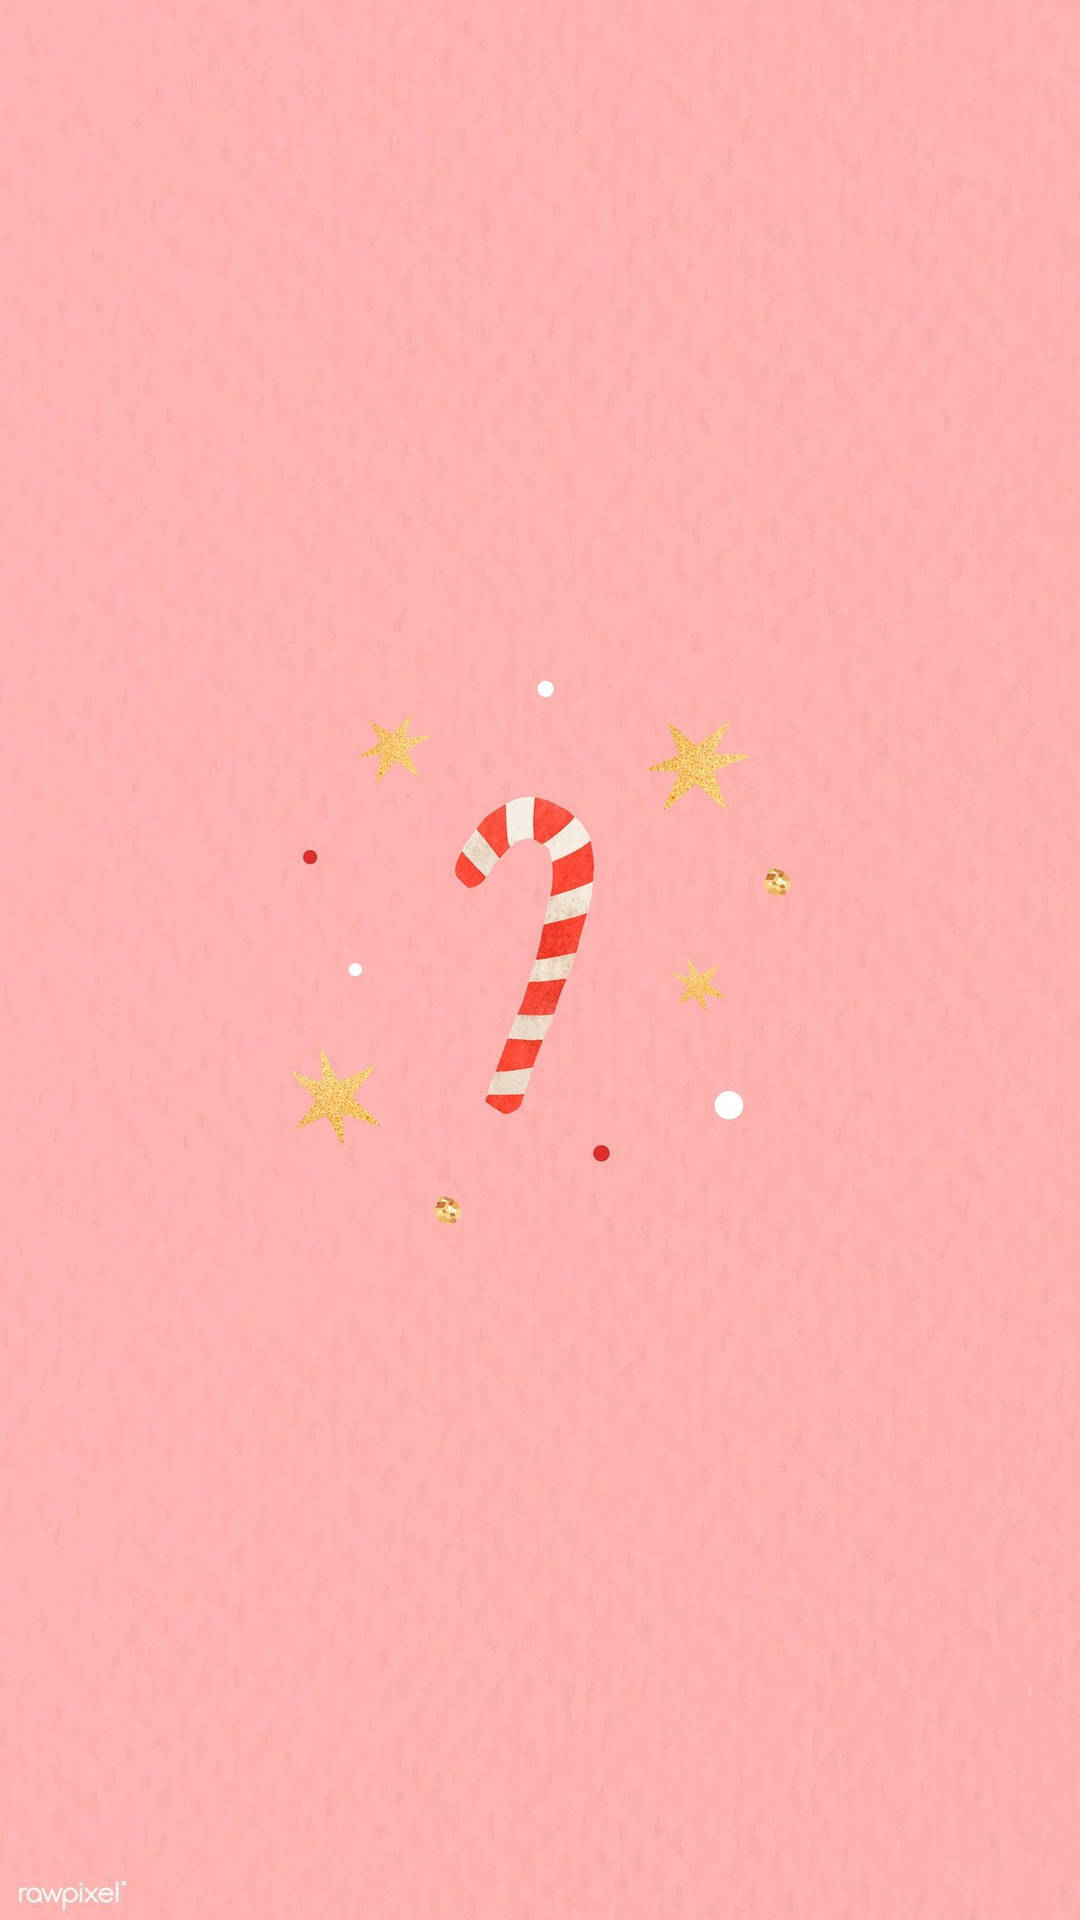 Candy Cane In Pink Background